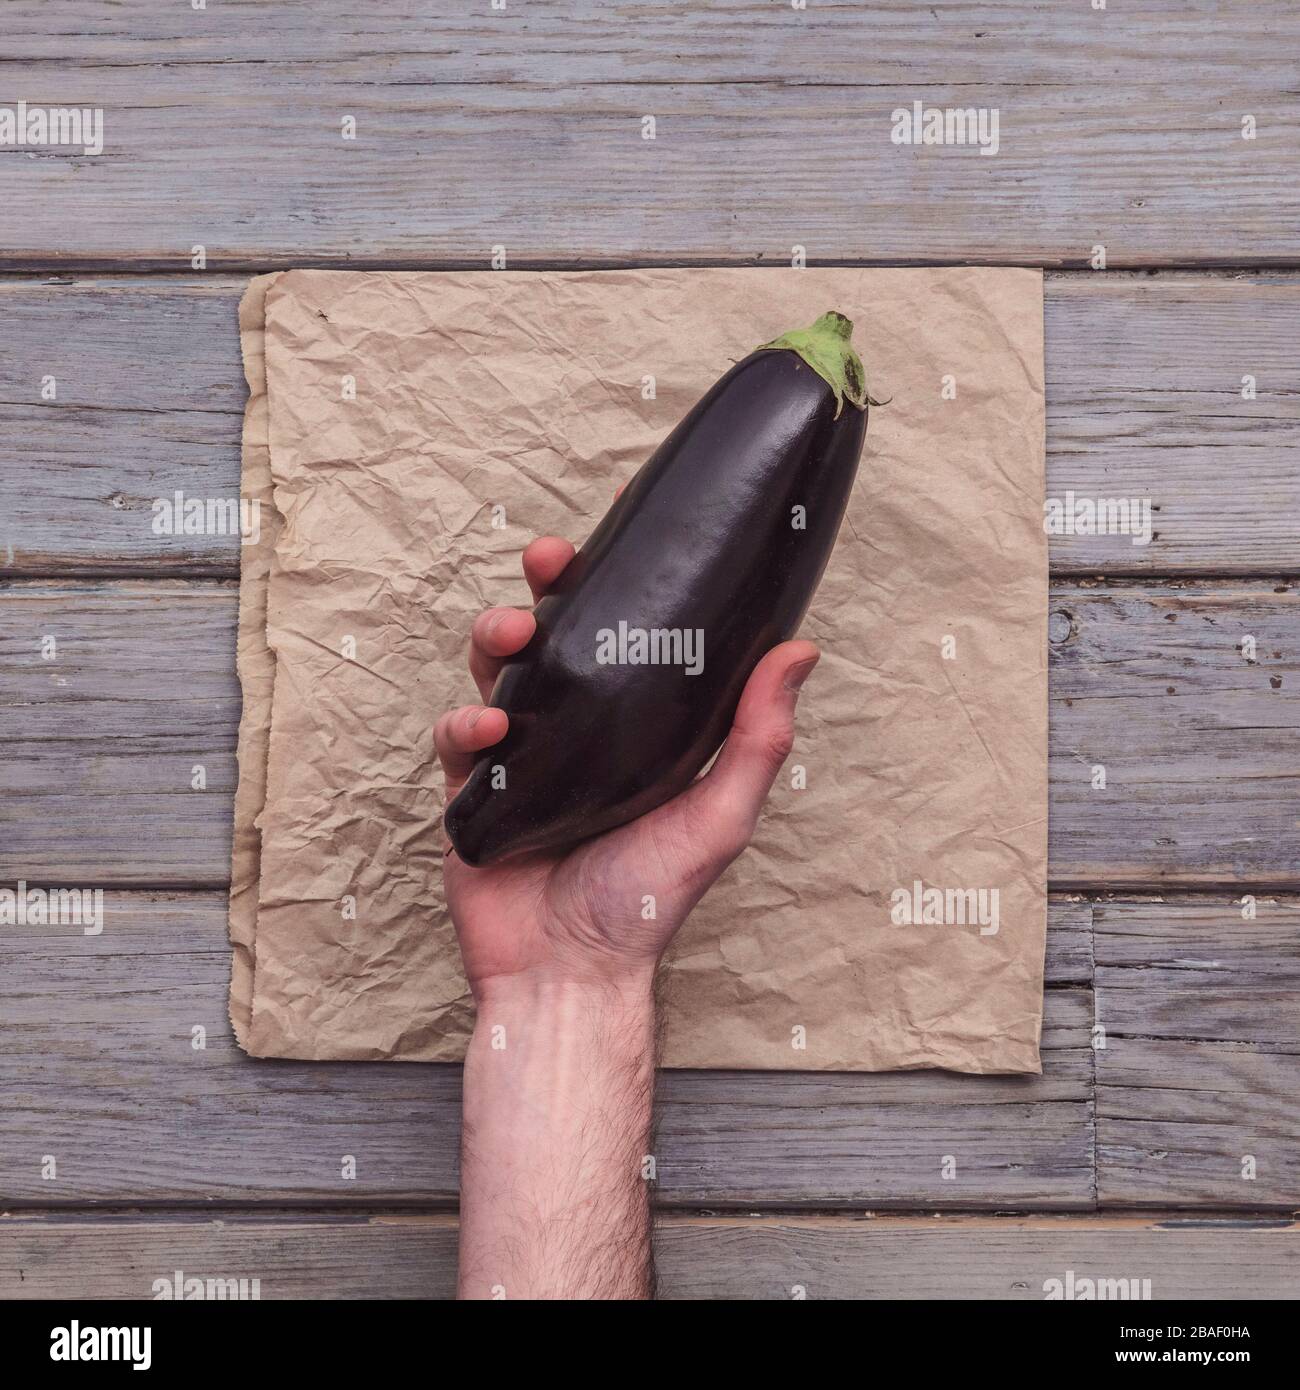 A male hand holding a fresh aubergine against a rustic background Stock Photo